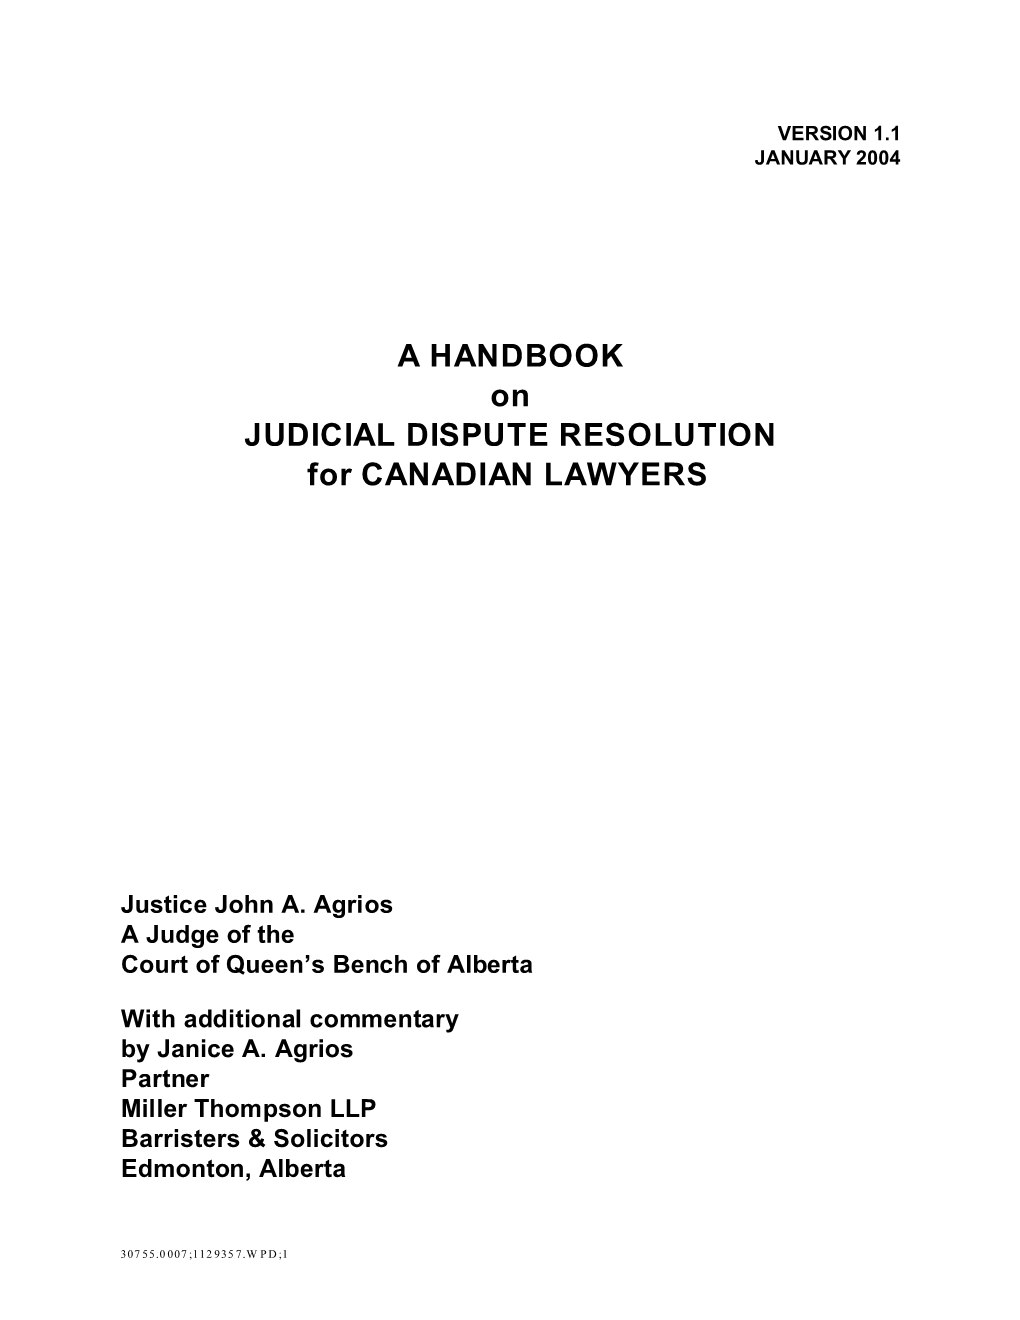 A HANDBOOK on JUDICIAL DISPUTE RESOLUTION for CANADIAN LAWYERS